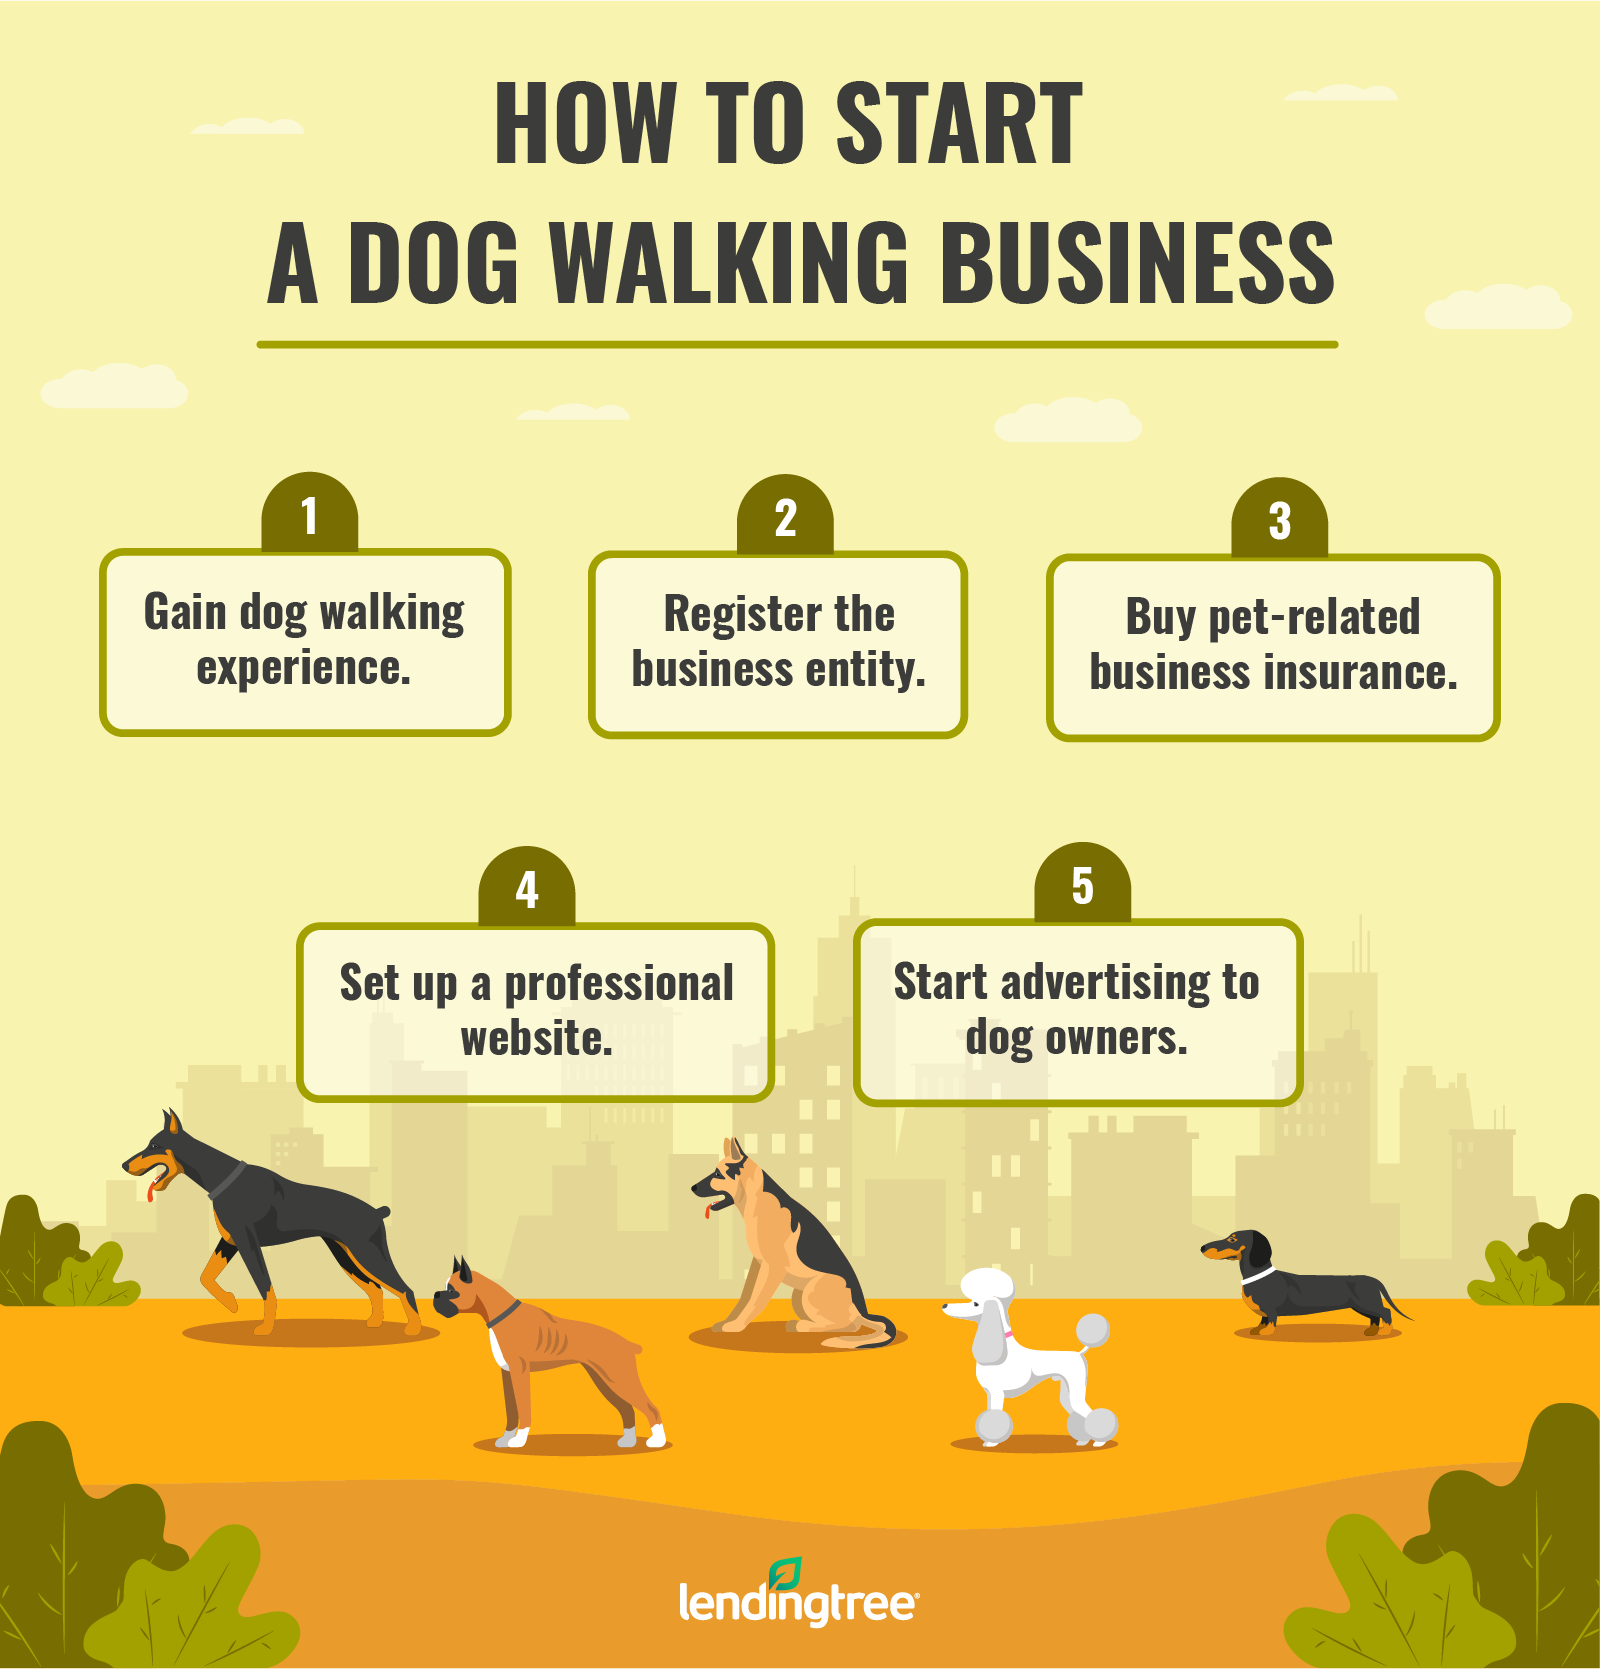 do dog trainers need a business license